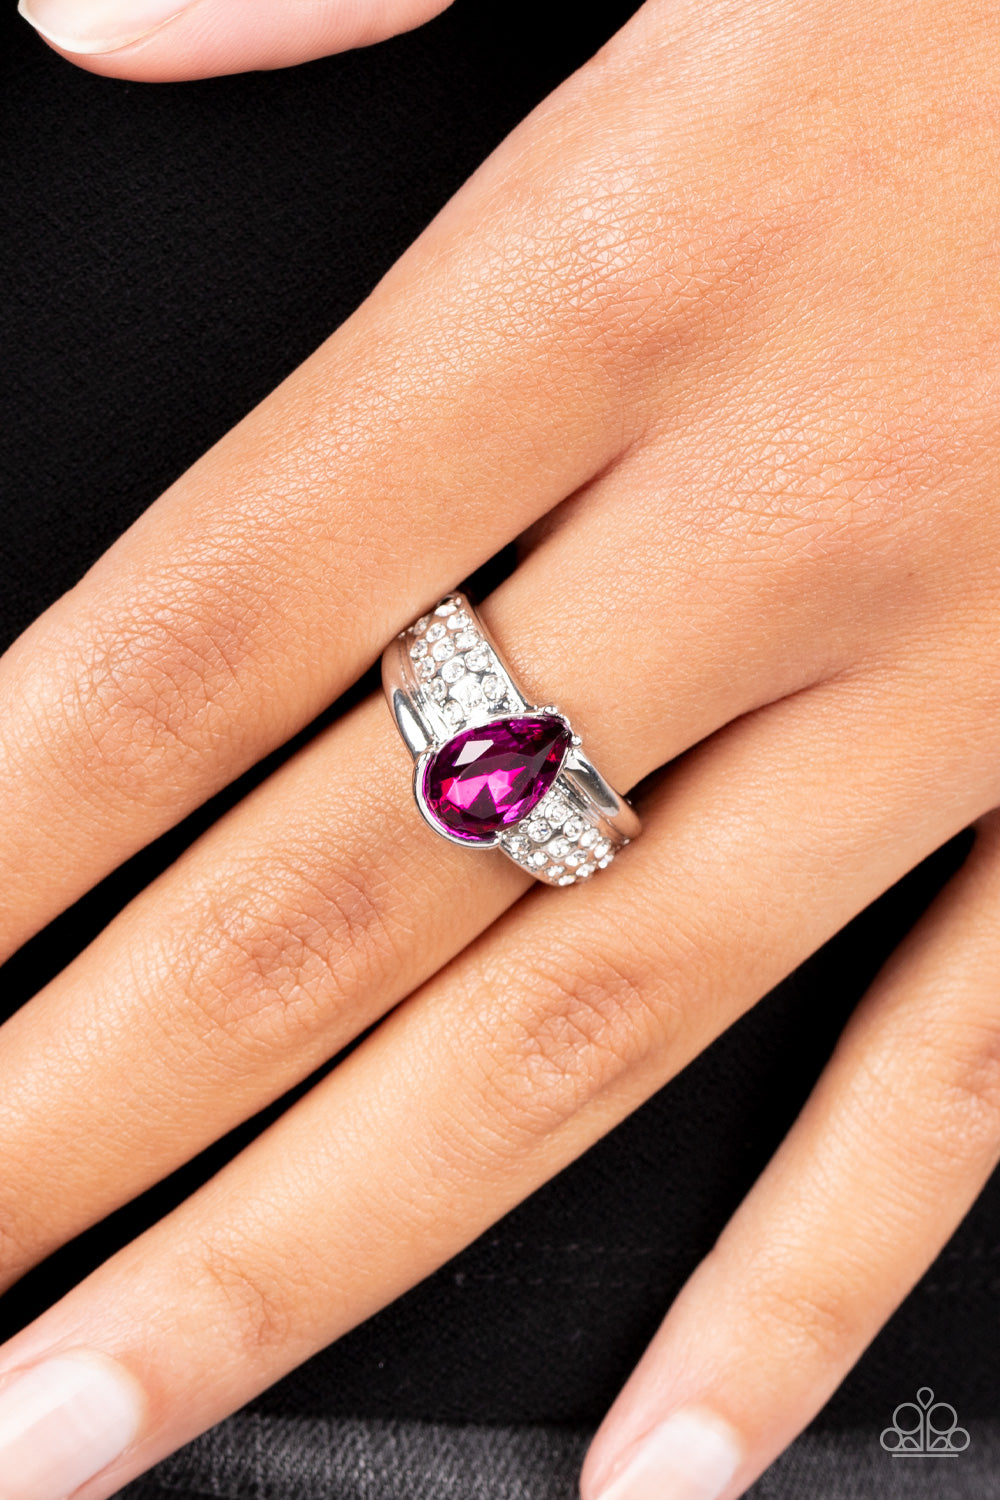 Paparazzi Dive Into Oblivion Pink Ring